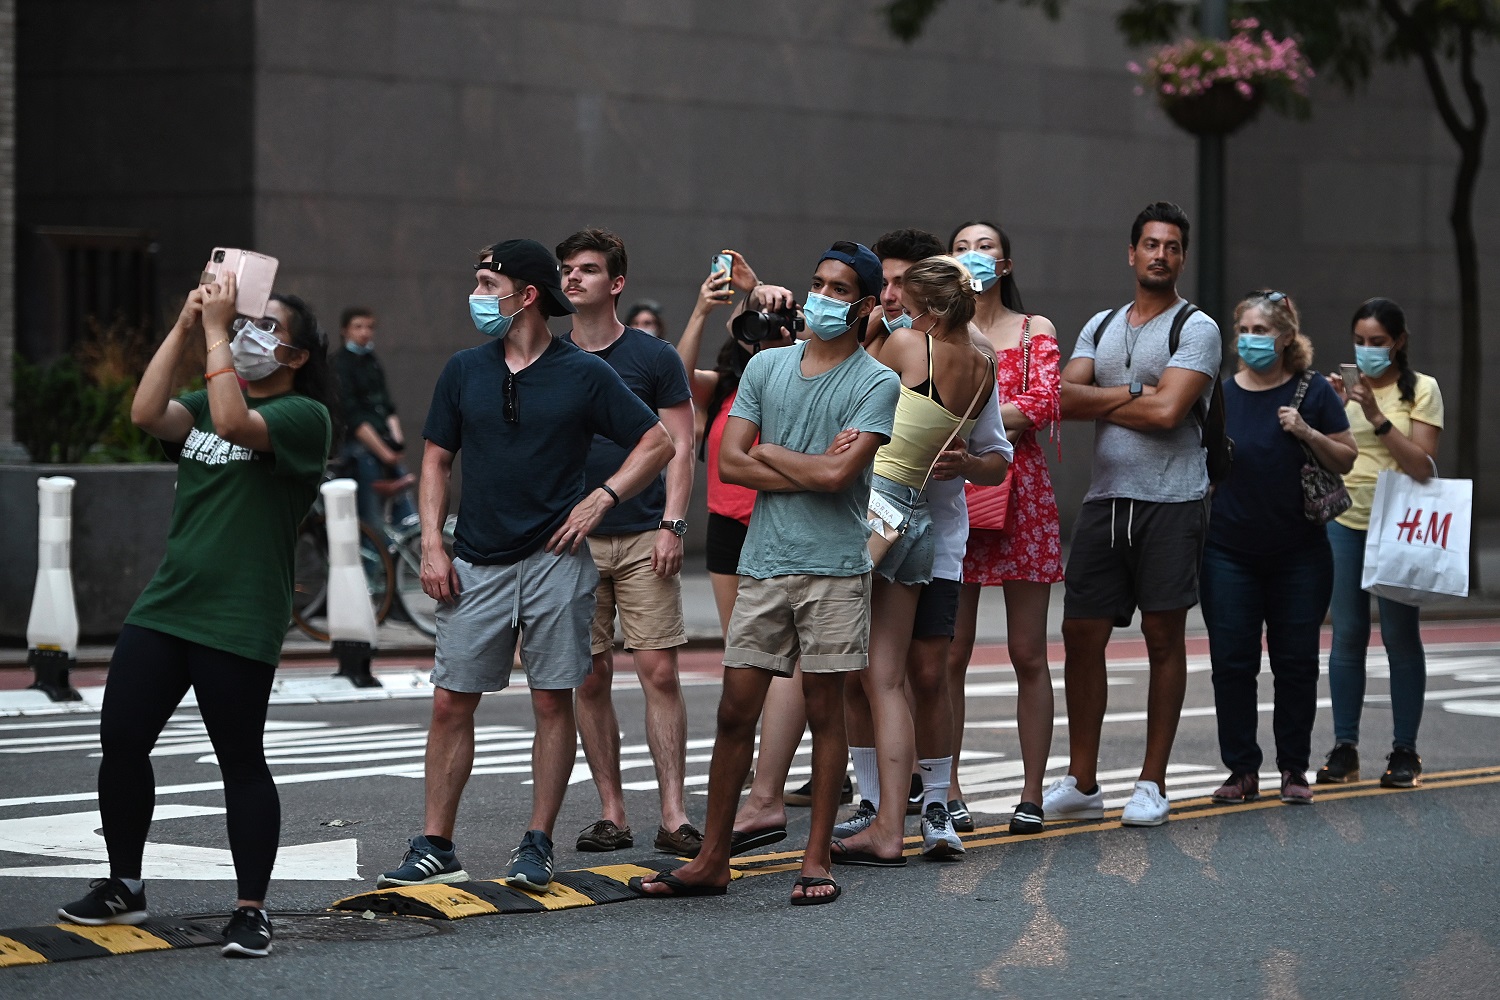 Some wearing face masks in the time of COVID-19, people line up along the median strip along 42nd Street and Second Avenue waiting for the sunset phenomenon known as Manhattanhenge, which was not viewable from that location for a second night in a row due to lingering storm clouds on the horizon, New York, NY, July 12, 2020. Manhattanhenge is the event during which the setting (or rising) sun aligns perfectly with east-west streets of the Manhattan island street grid, which occurs twice a year. (Anthony Behar/Sipa USA)No Use UK. No Use Germany.